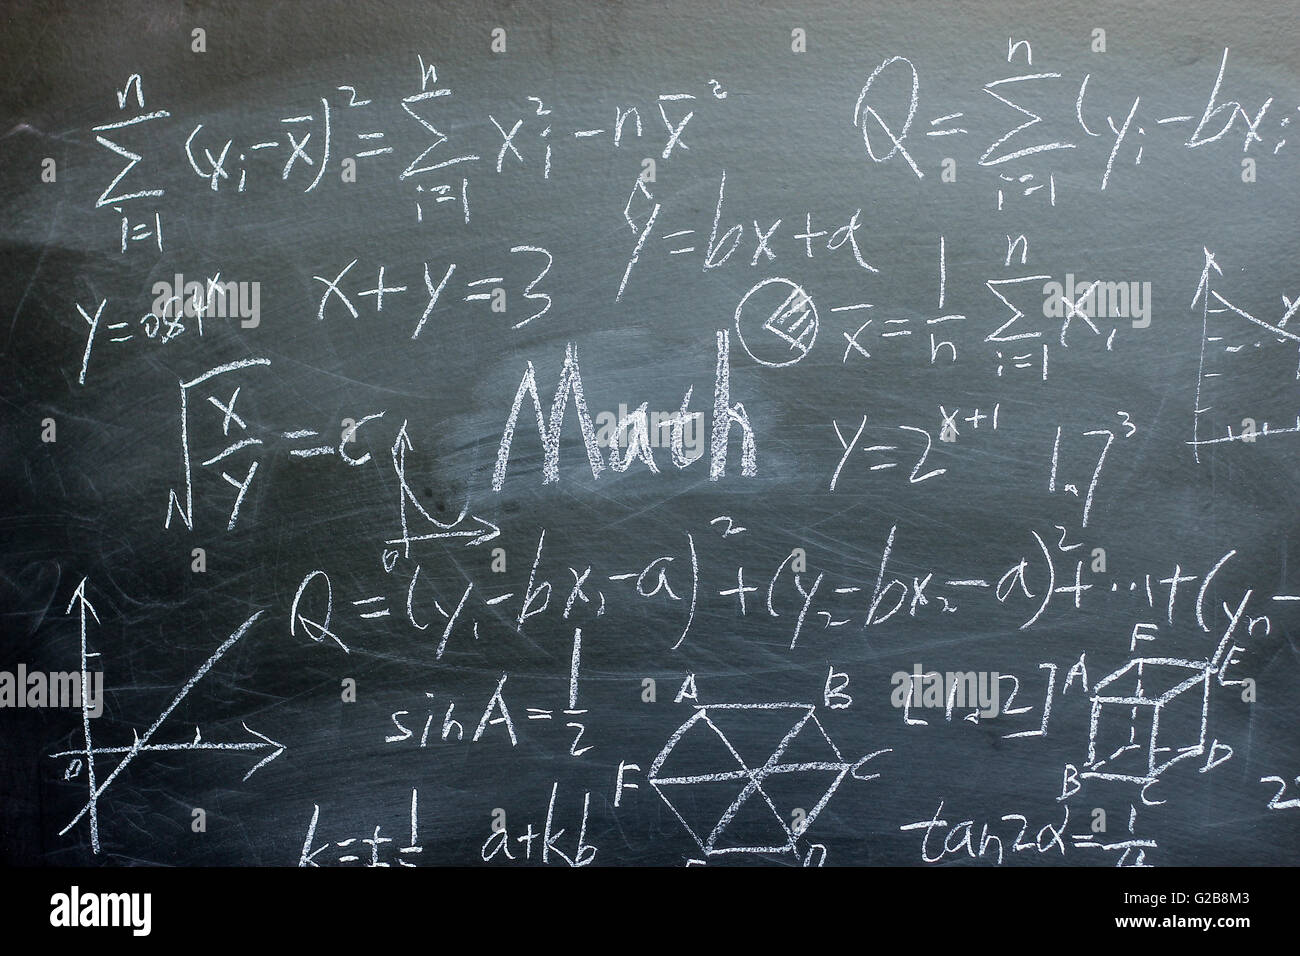 Math text with some maths formulas on chalkboard background Stock Photo -  Alamy